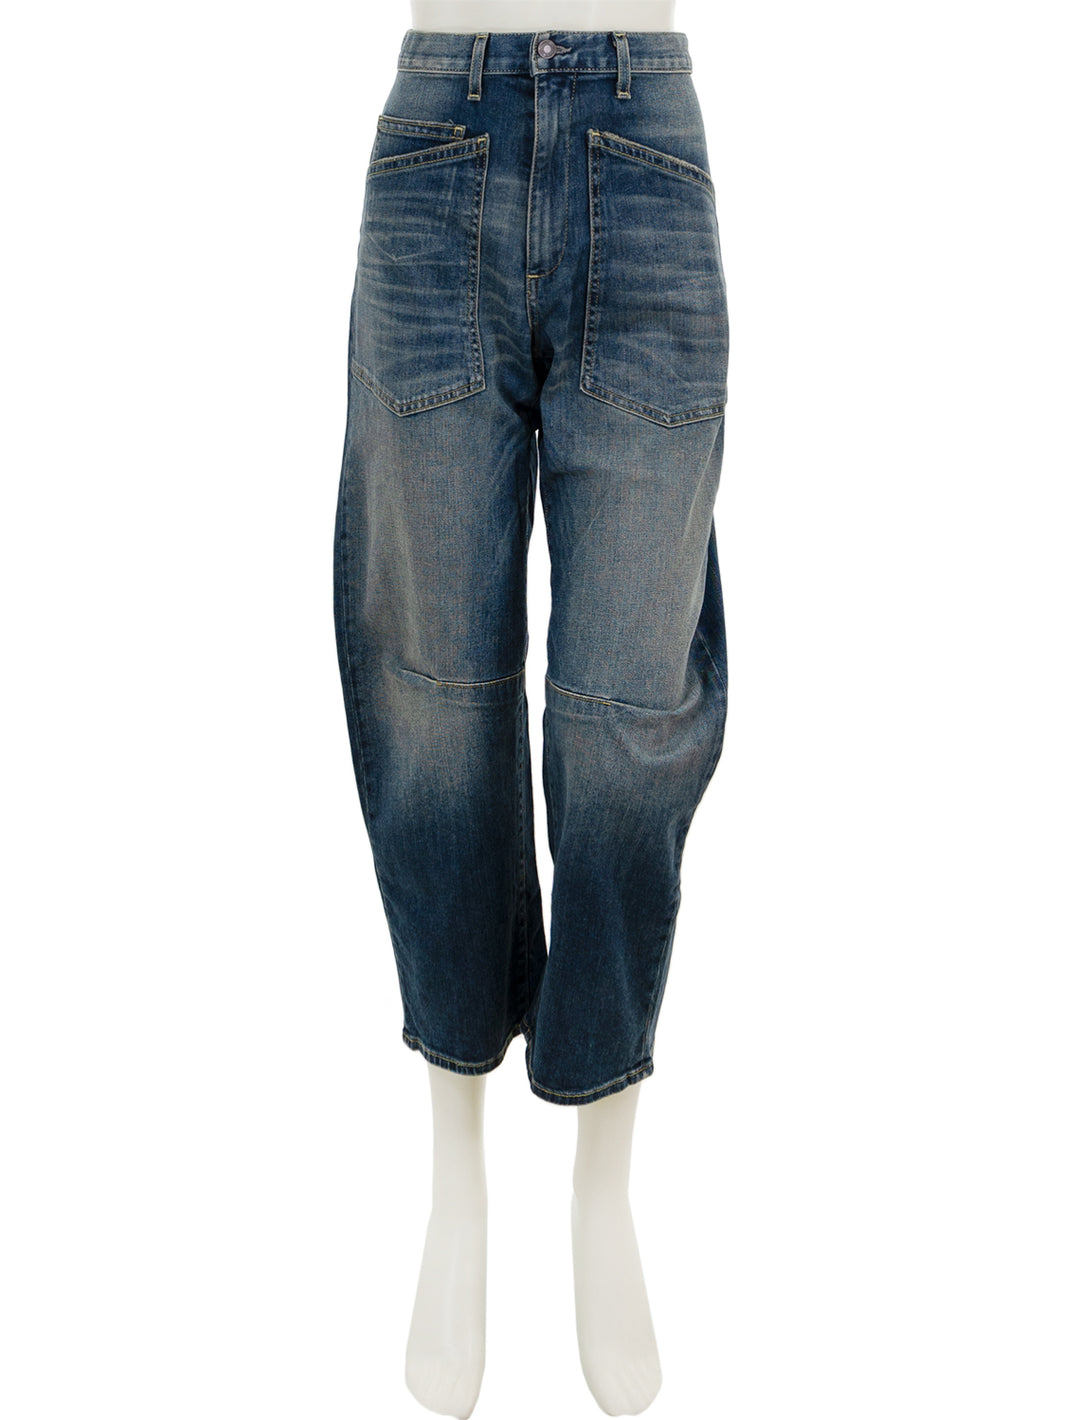 Front view of Nili Lotan's shon jean in classic wash.